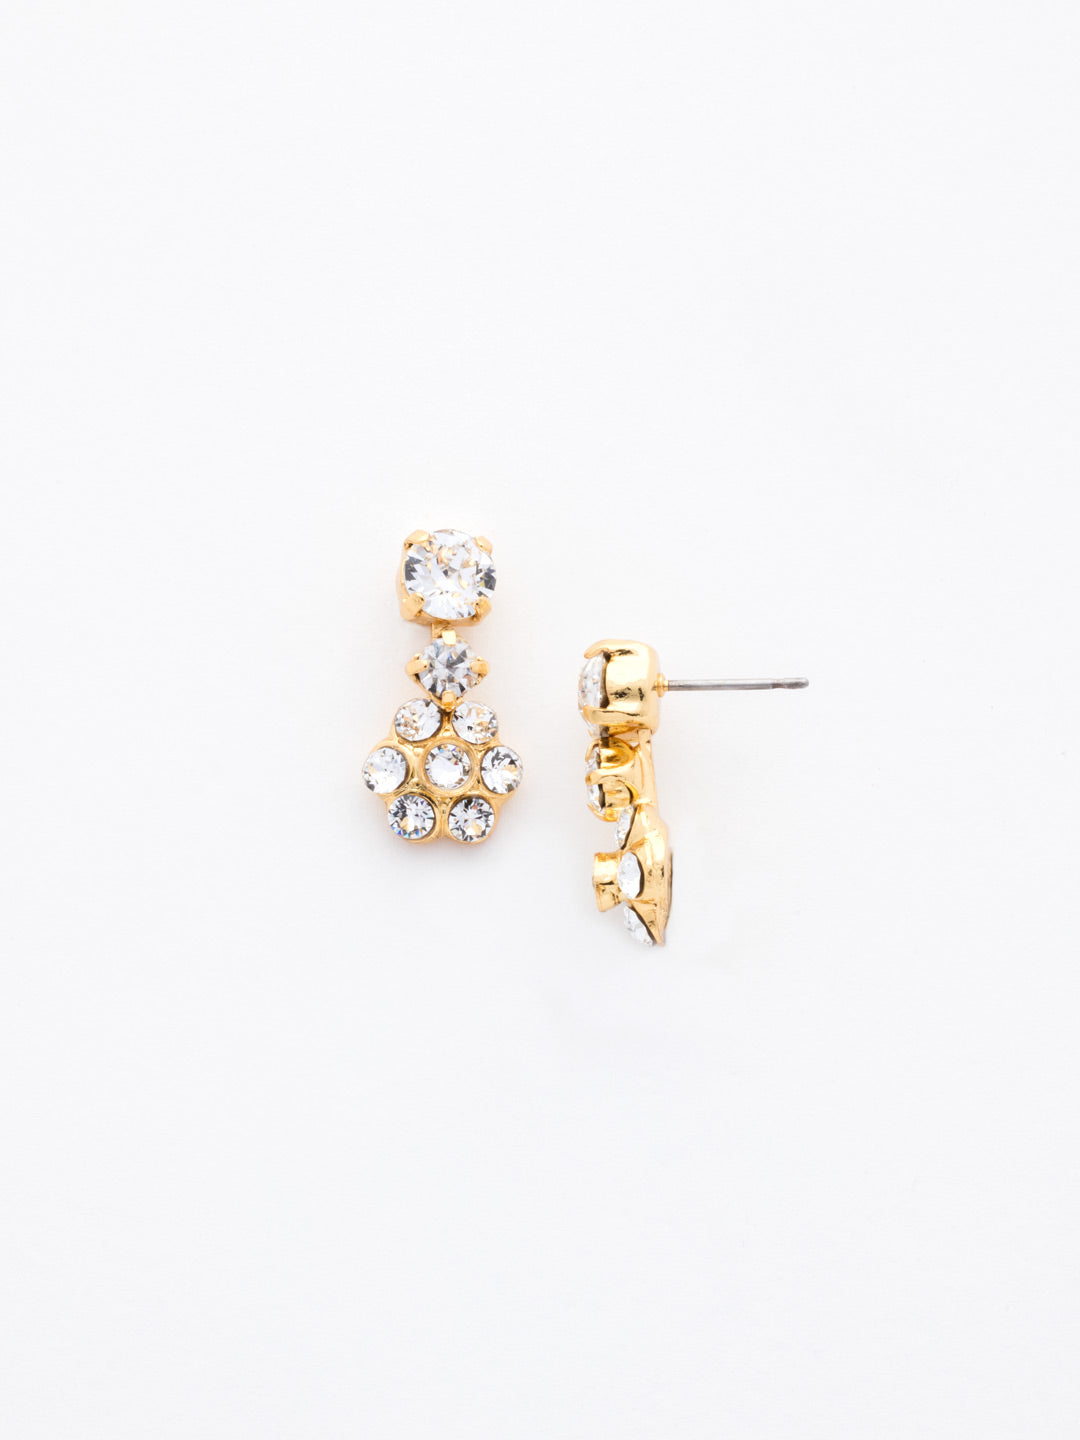 Flower Drop Dangle Earrings - EBE2BGCRY - <p>Simply sweet. A floral crystal cluster drops from a round crystal post in these delicate drop earrings. They add a sweet touch of romance to any outfit. From Sorrelli's Crystal collection in our Bright Gold-tone finish.</p>